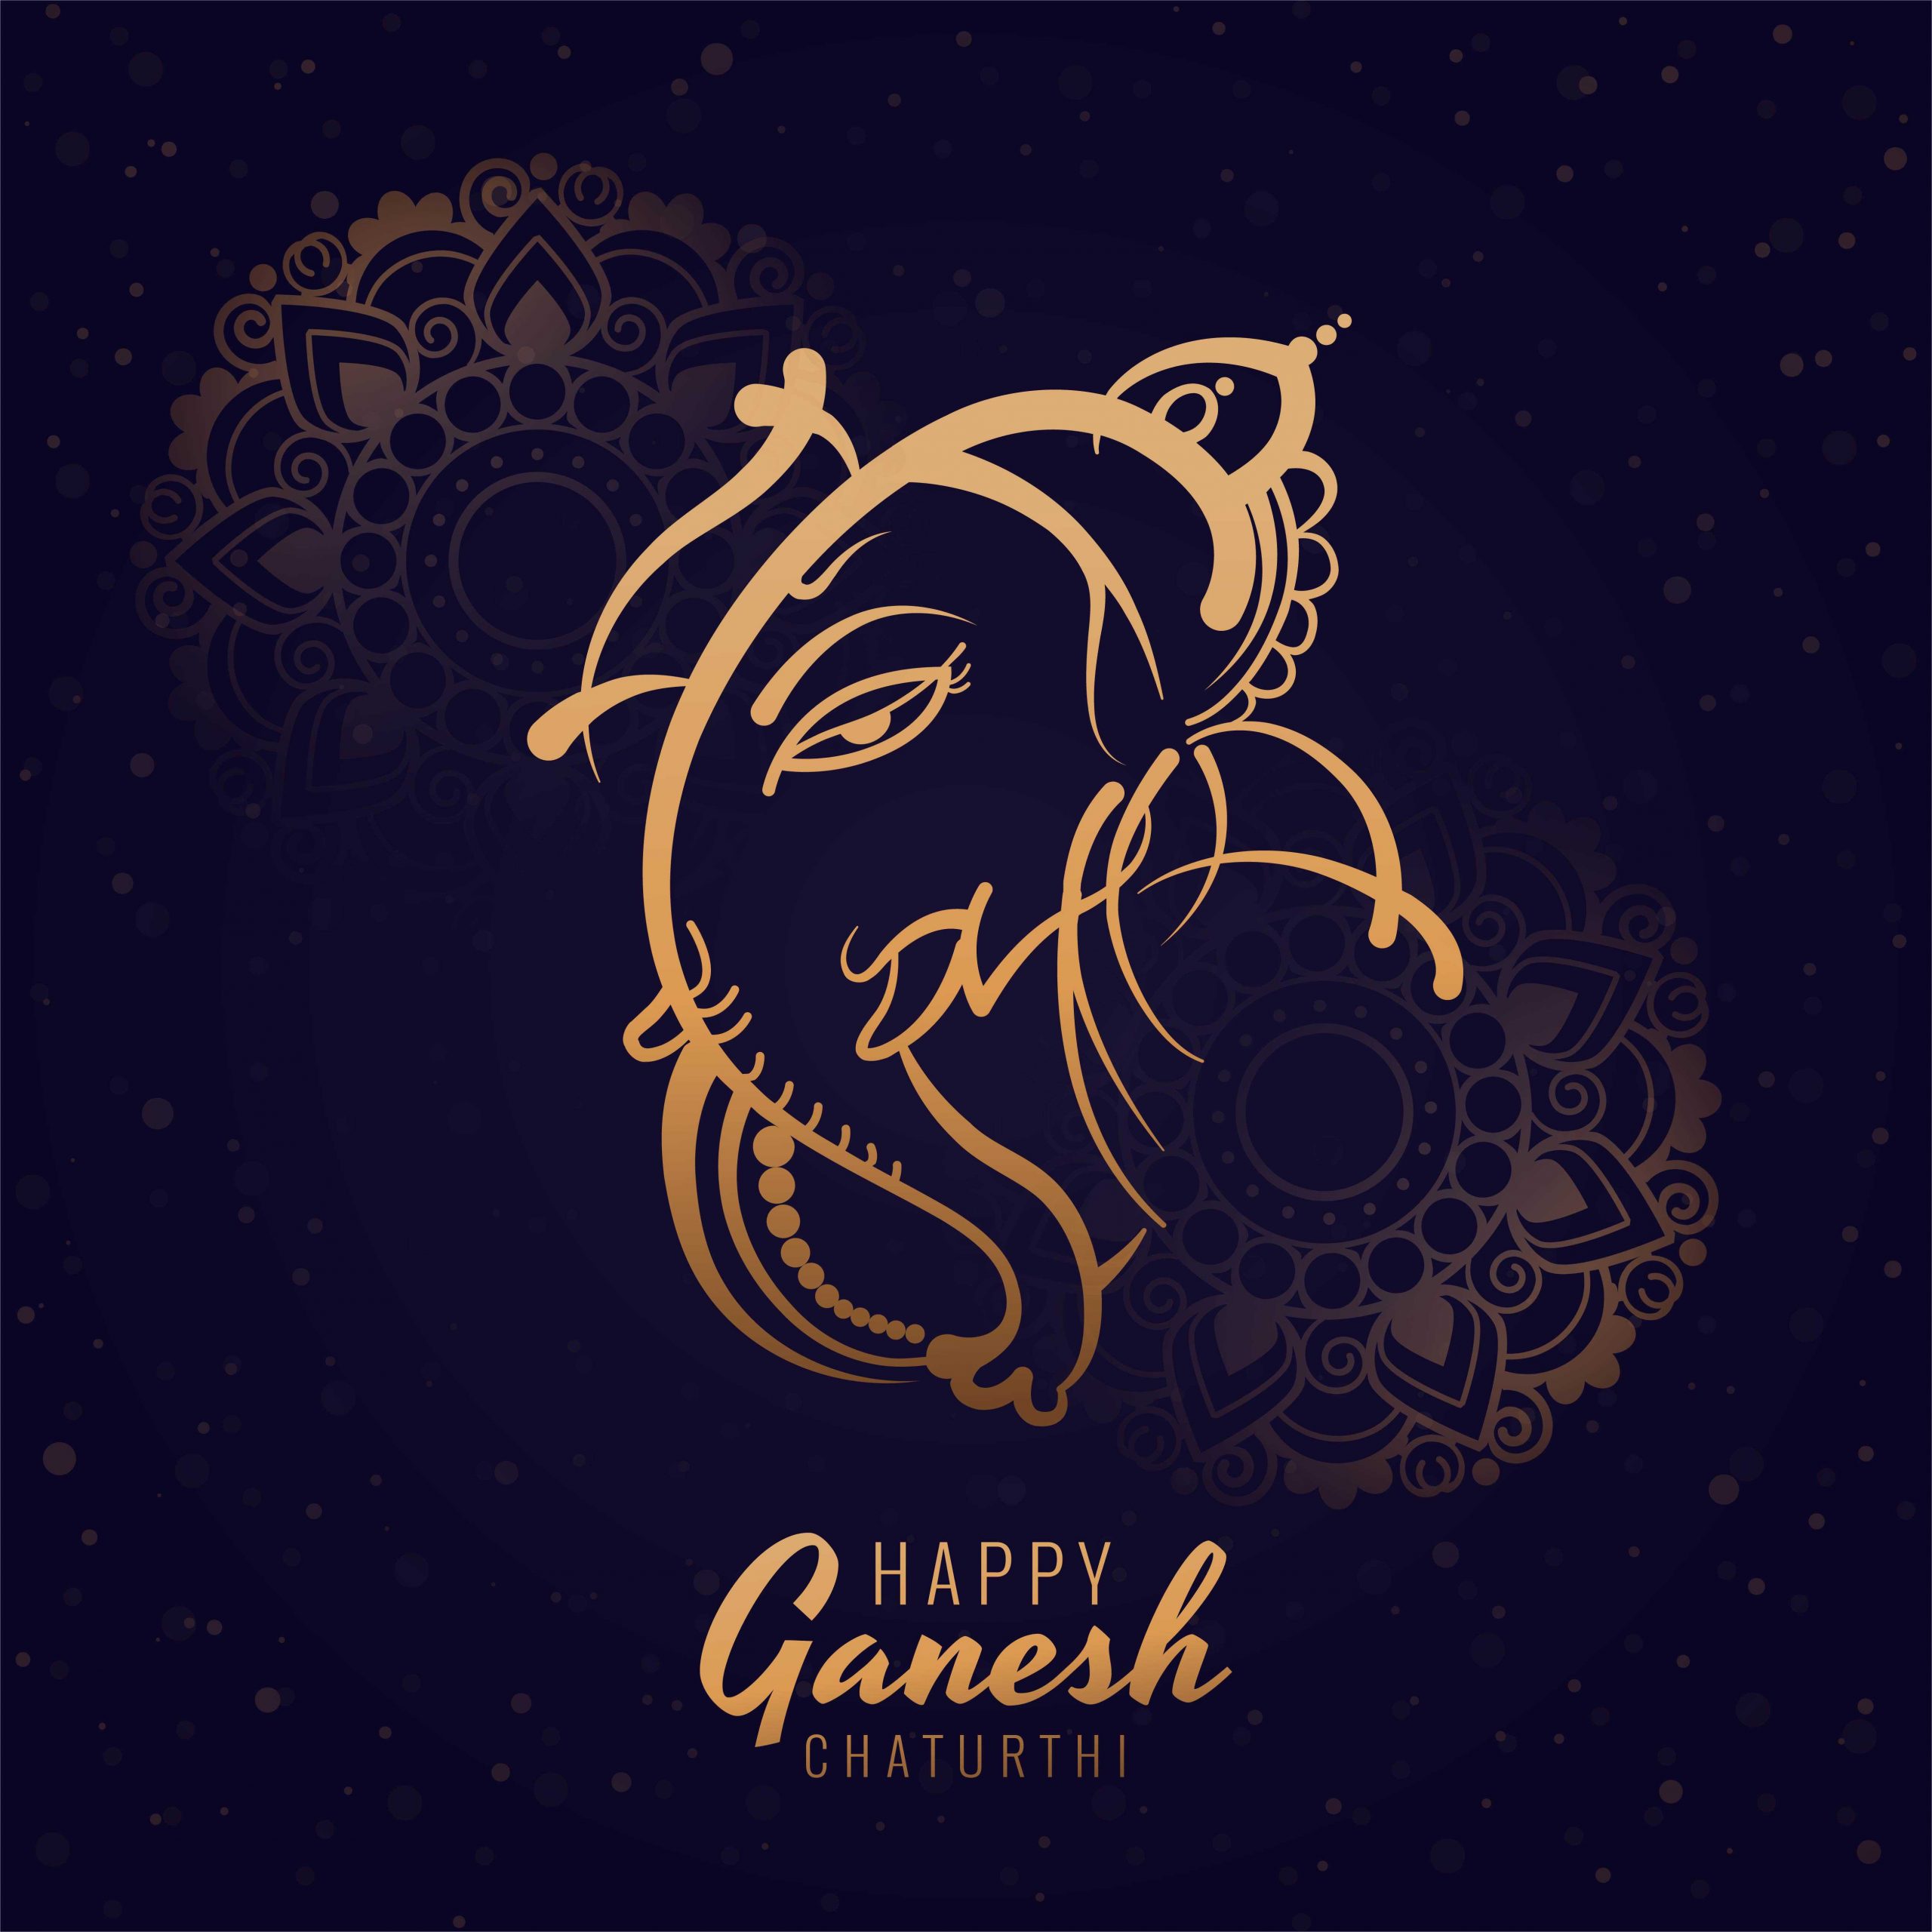 Ganesh Chaturthi pictures download 